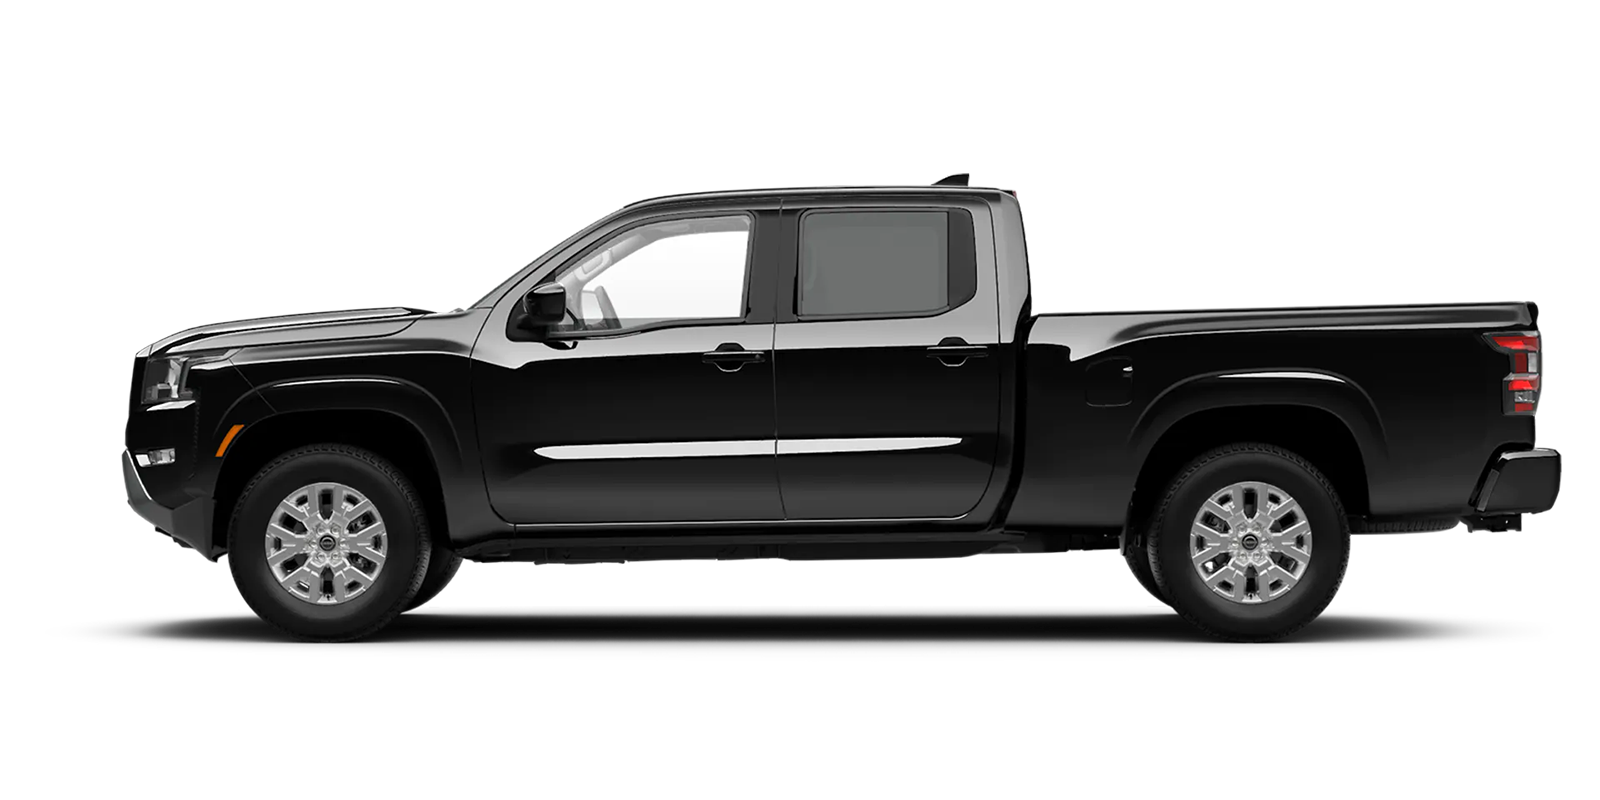 2022 Frontier Crew Cab Long Bed SV 4x4 in Super Black | Grainger Nissan of Anderson in Anderson SC